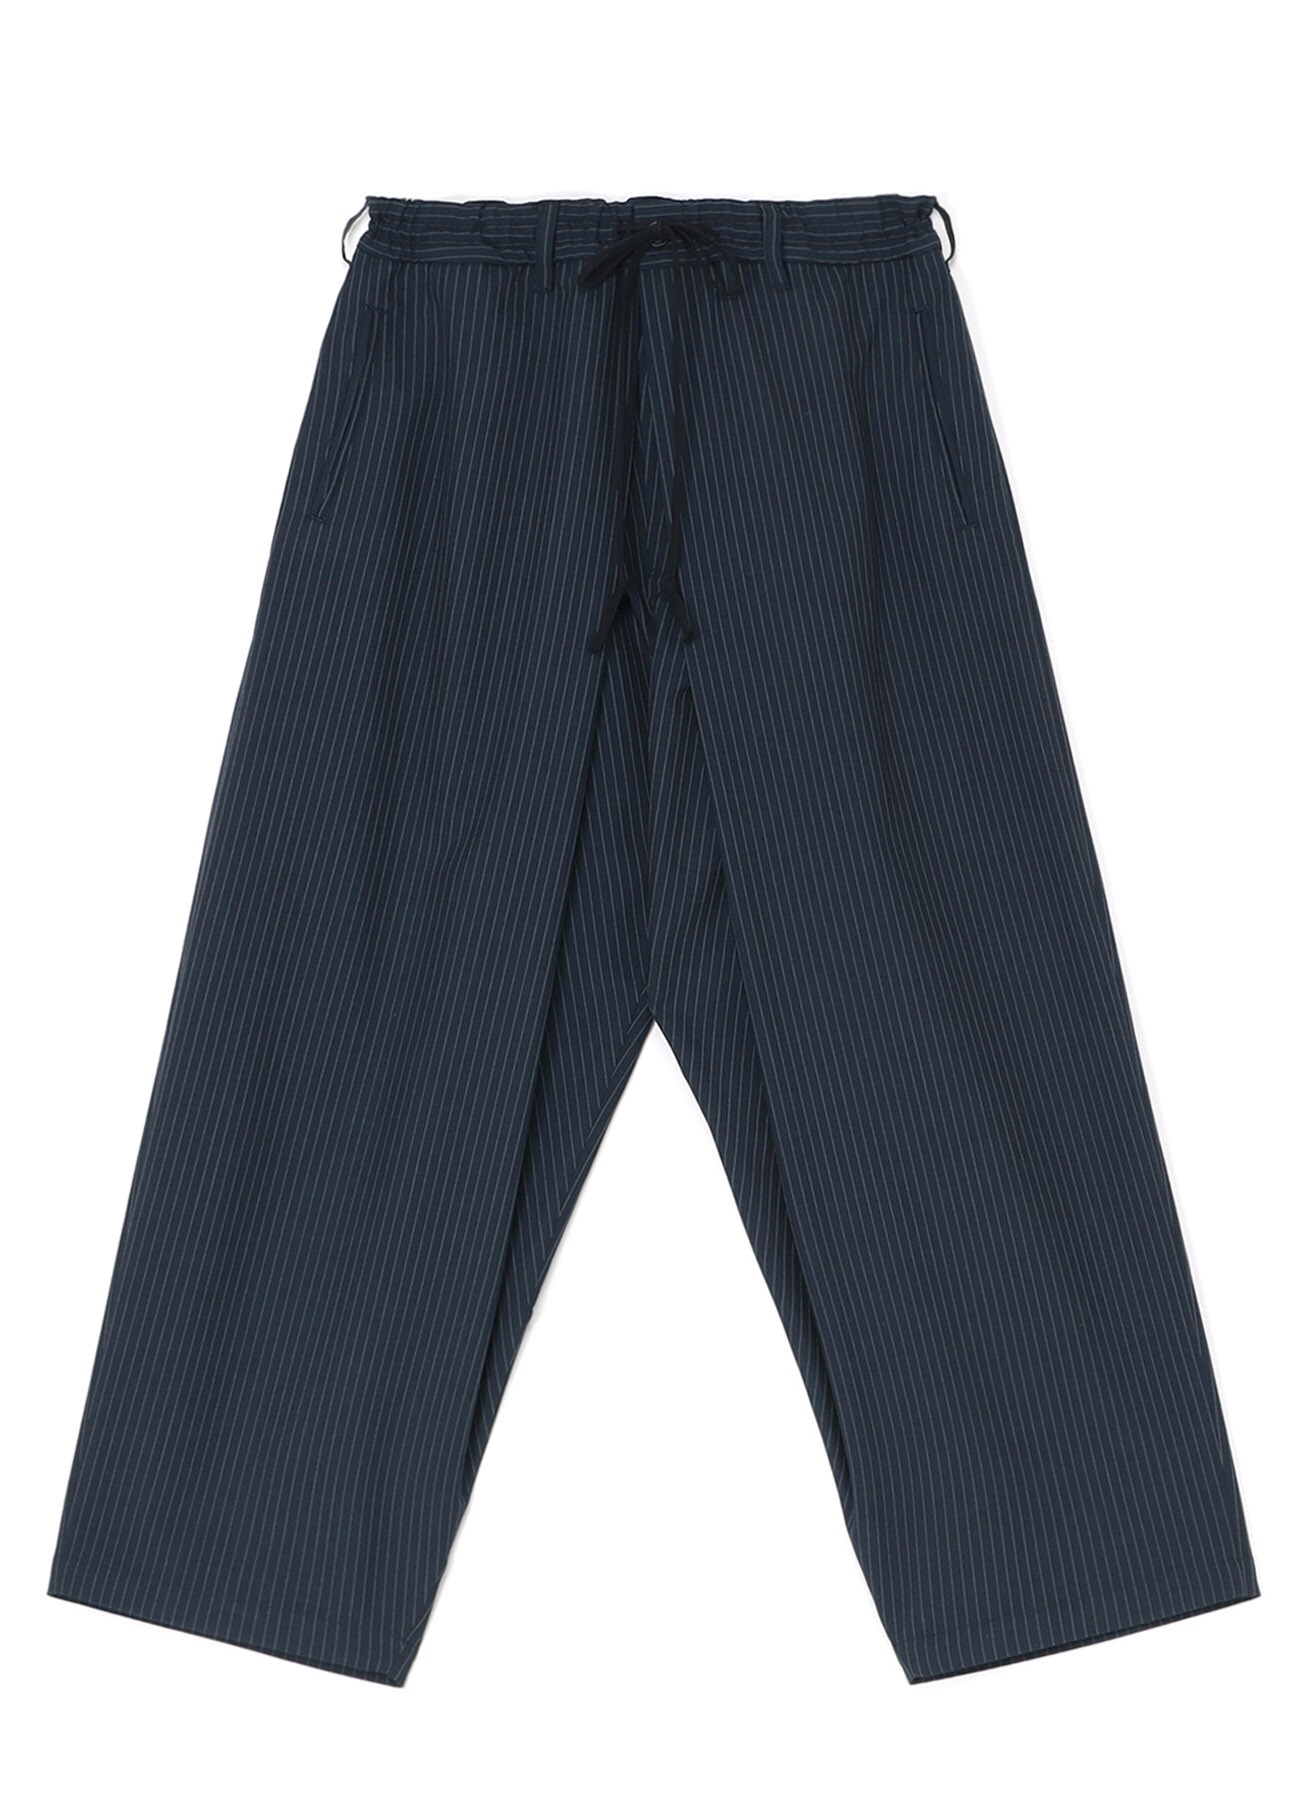 STRIPED WRAP PANTS WITH PLEATS ON THE FRONT(M Navy): S'YTE｜THE 